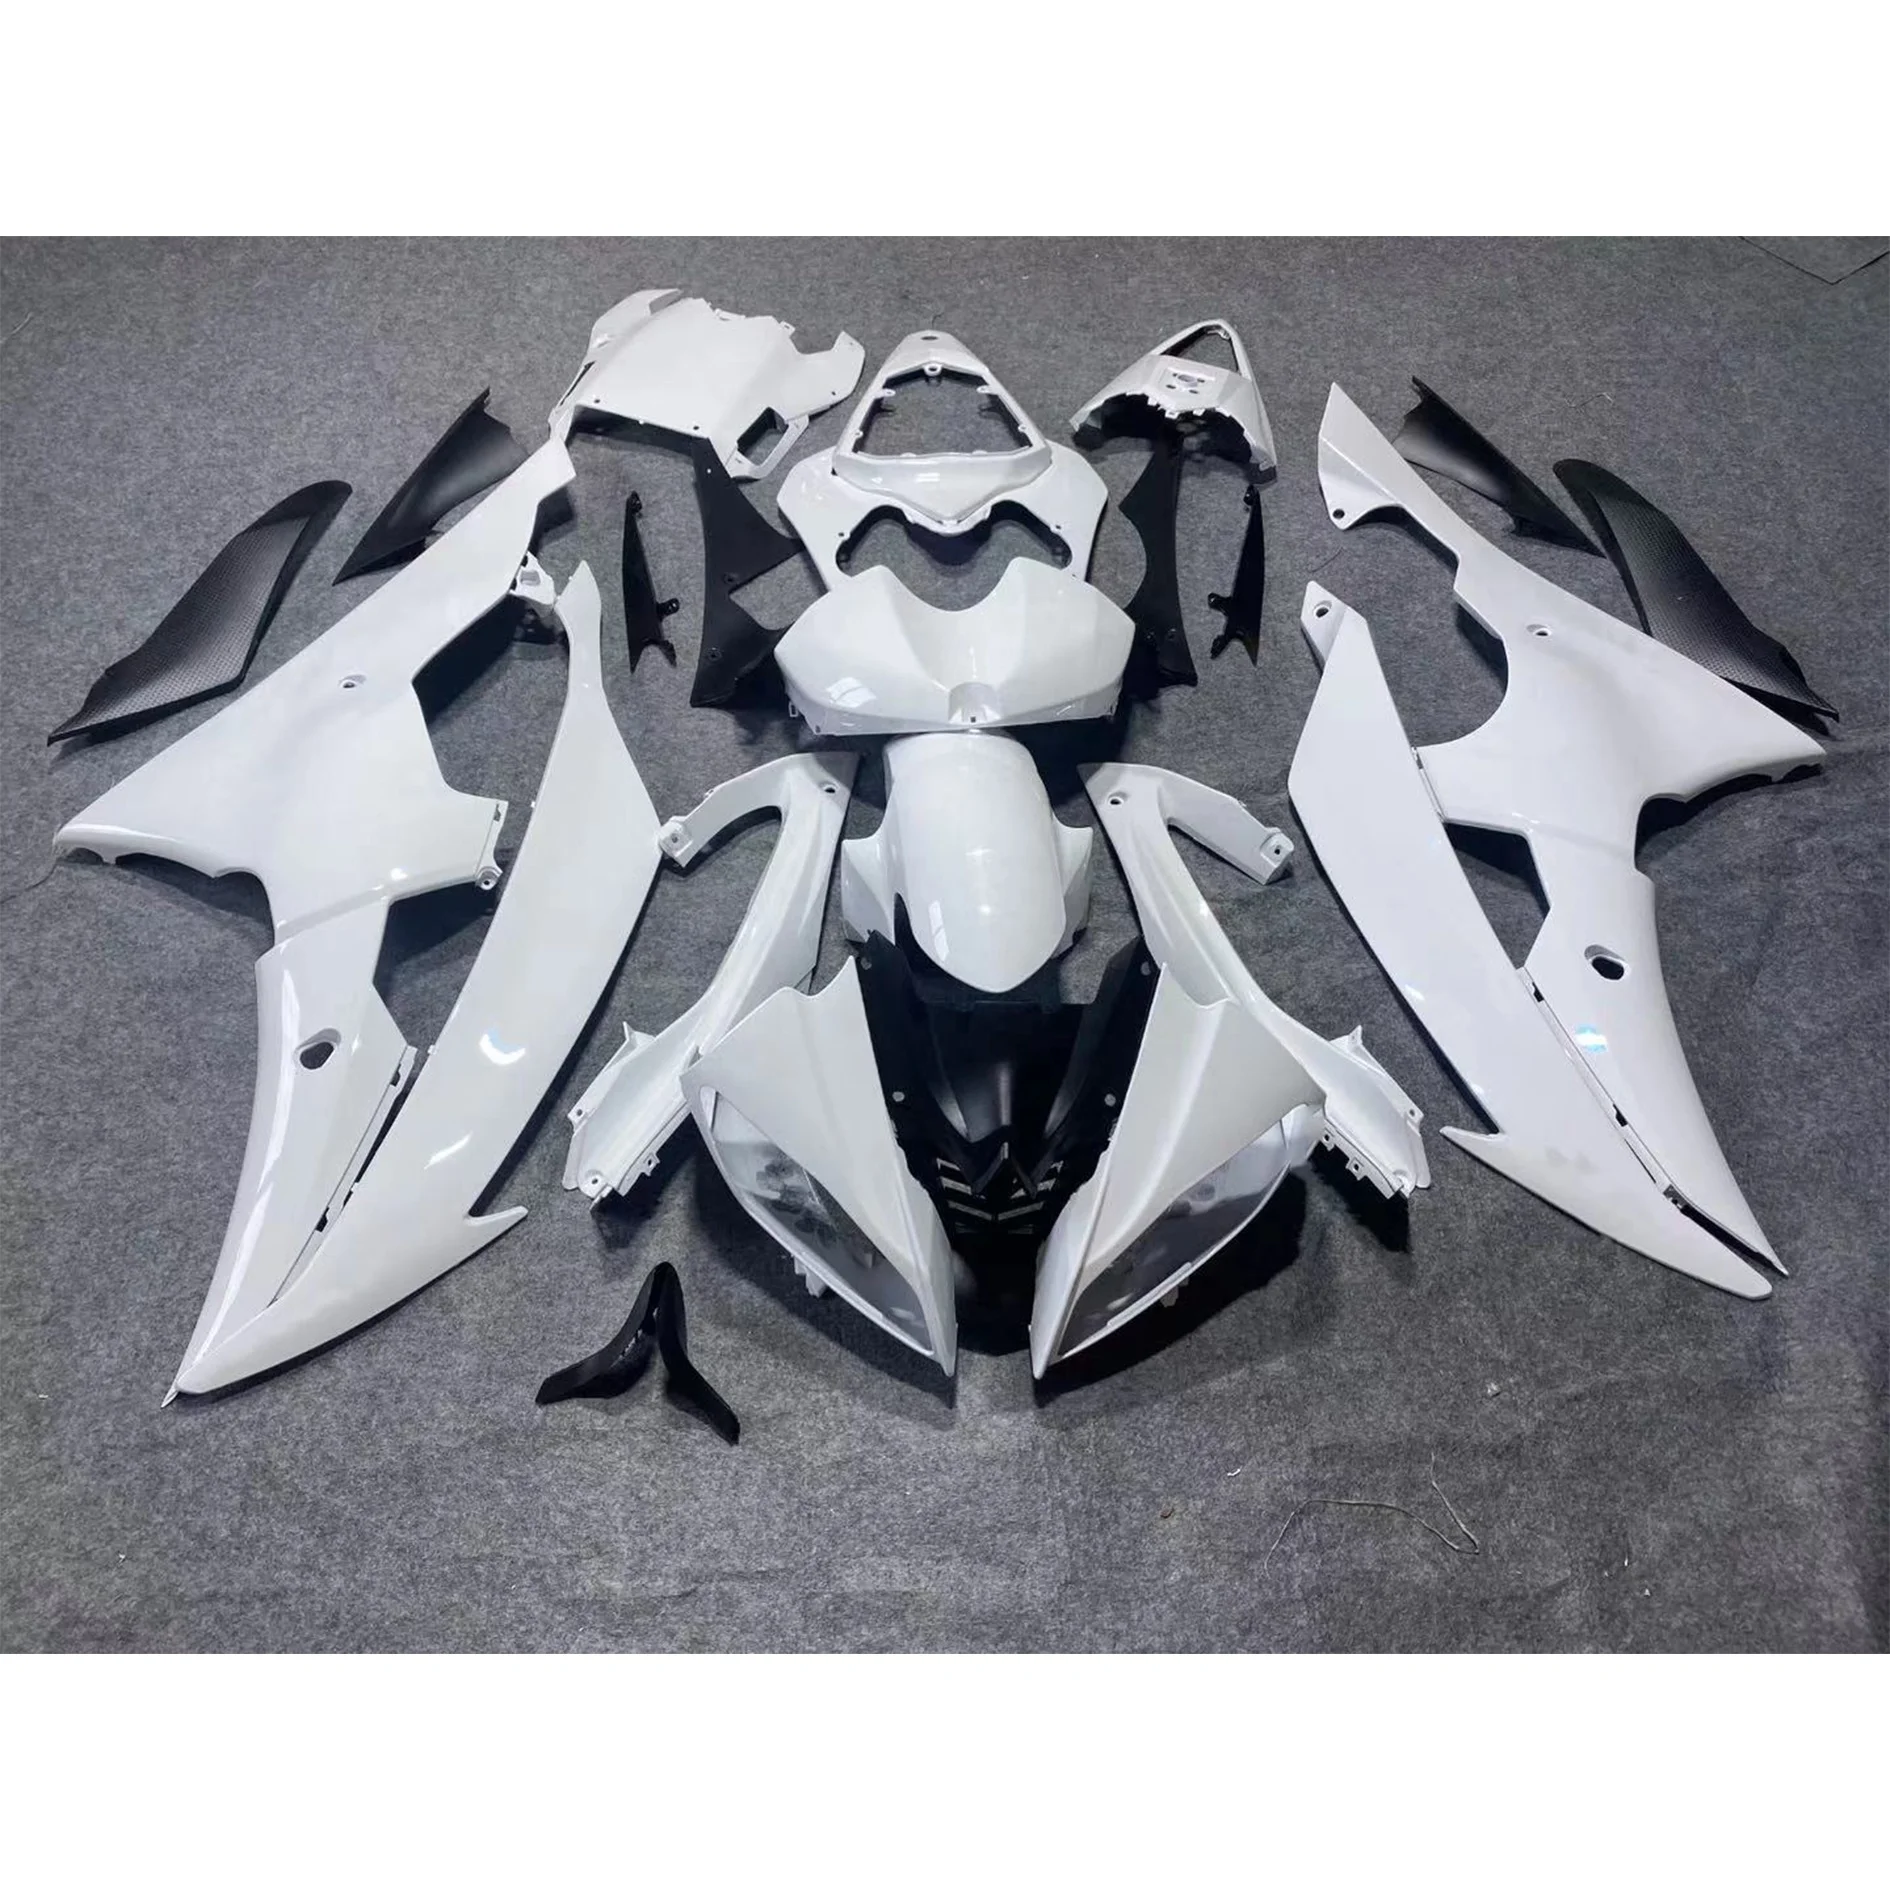 

2021 WHSC White Unpainted Motorcycle Accessories For YAMAHA R6 2008-2015 Custom Cover Body ABS Plastic Fairings Kit, Pictures shown